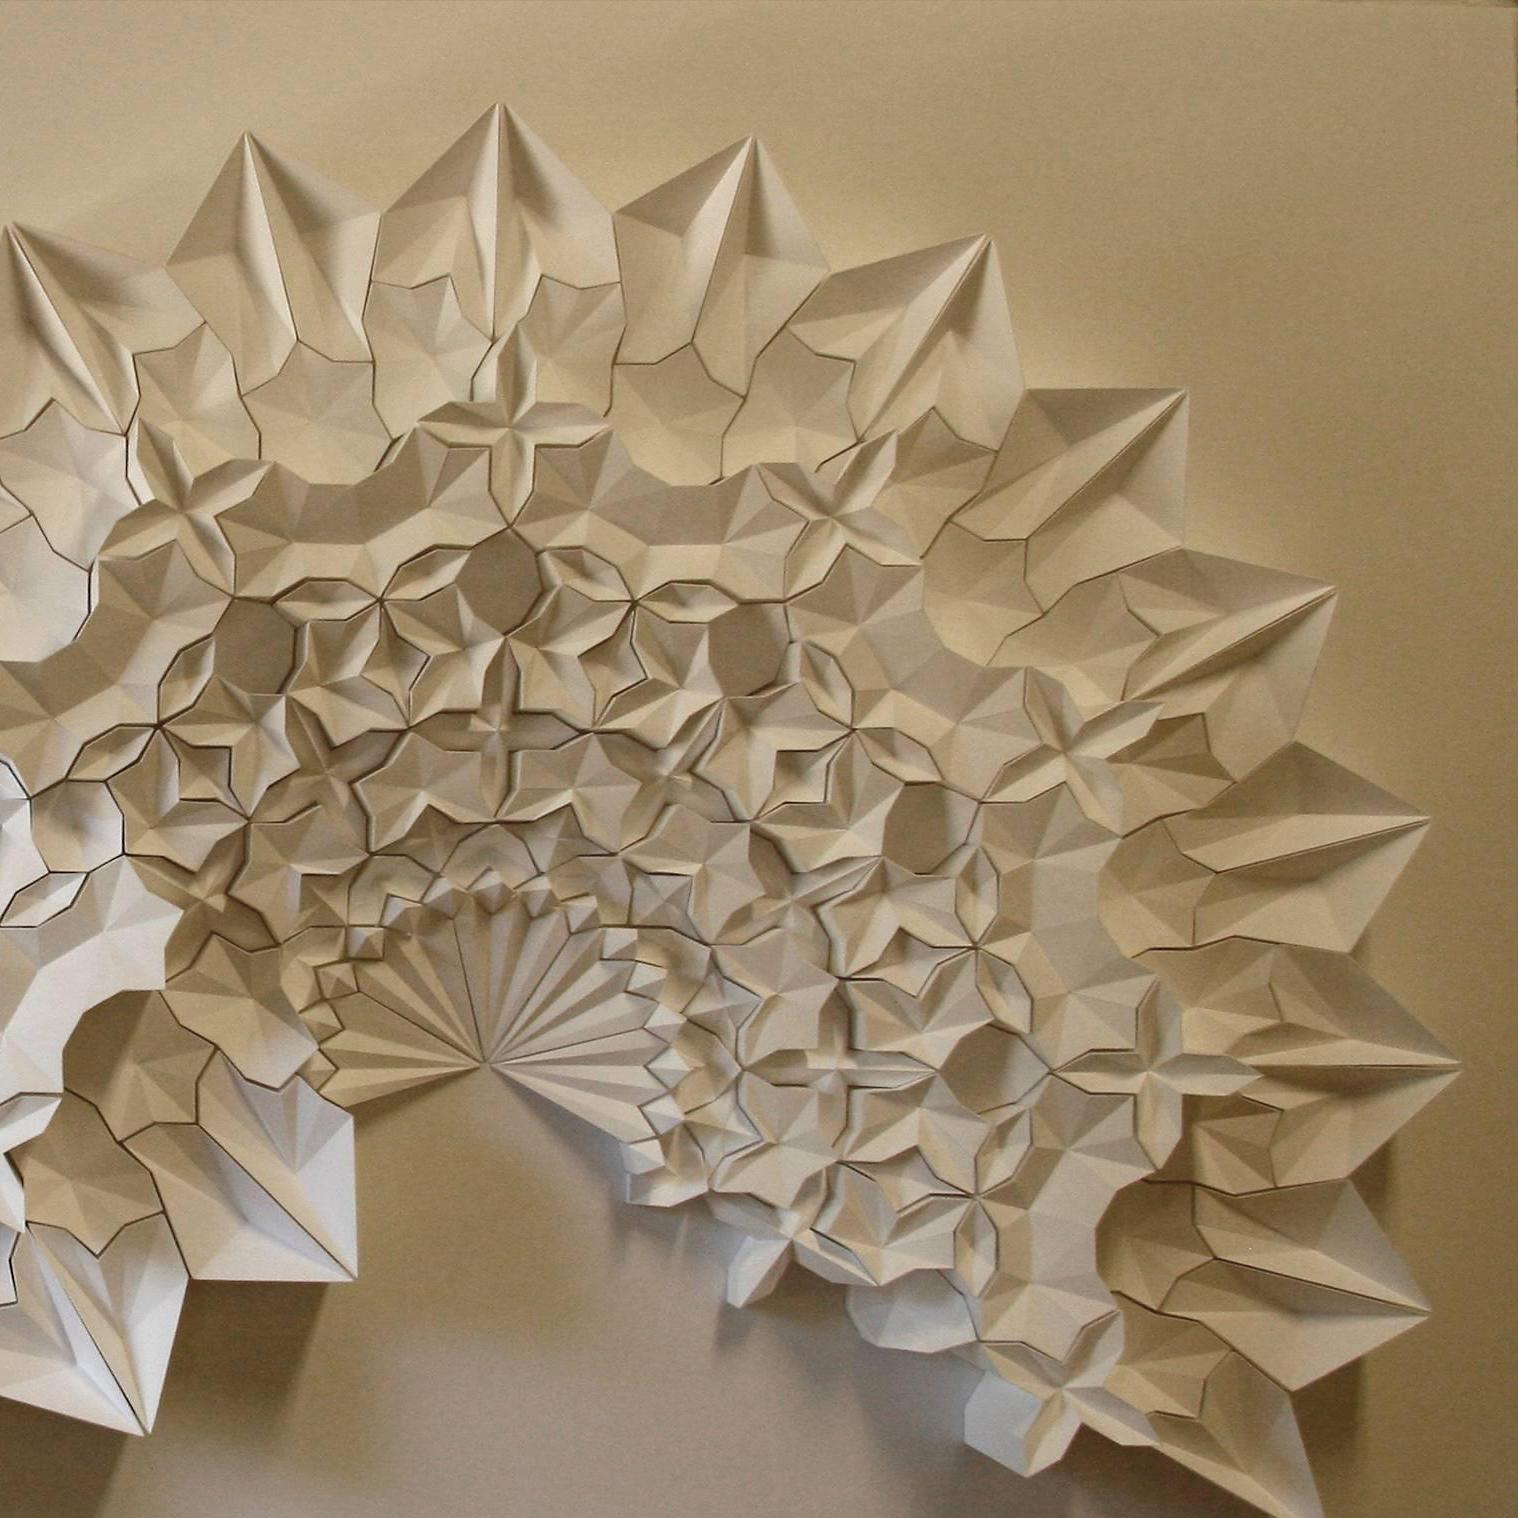 As a paper engineer, my work is rooted in print media, book arts and commercial design. Beginning with an initial fold, a single action causes a transfer of energy to subsequent folds, which ultimately manifest in drawing and three dimensional